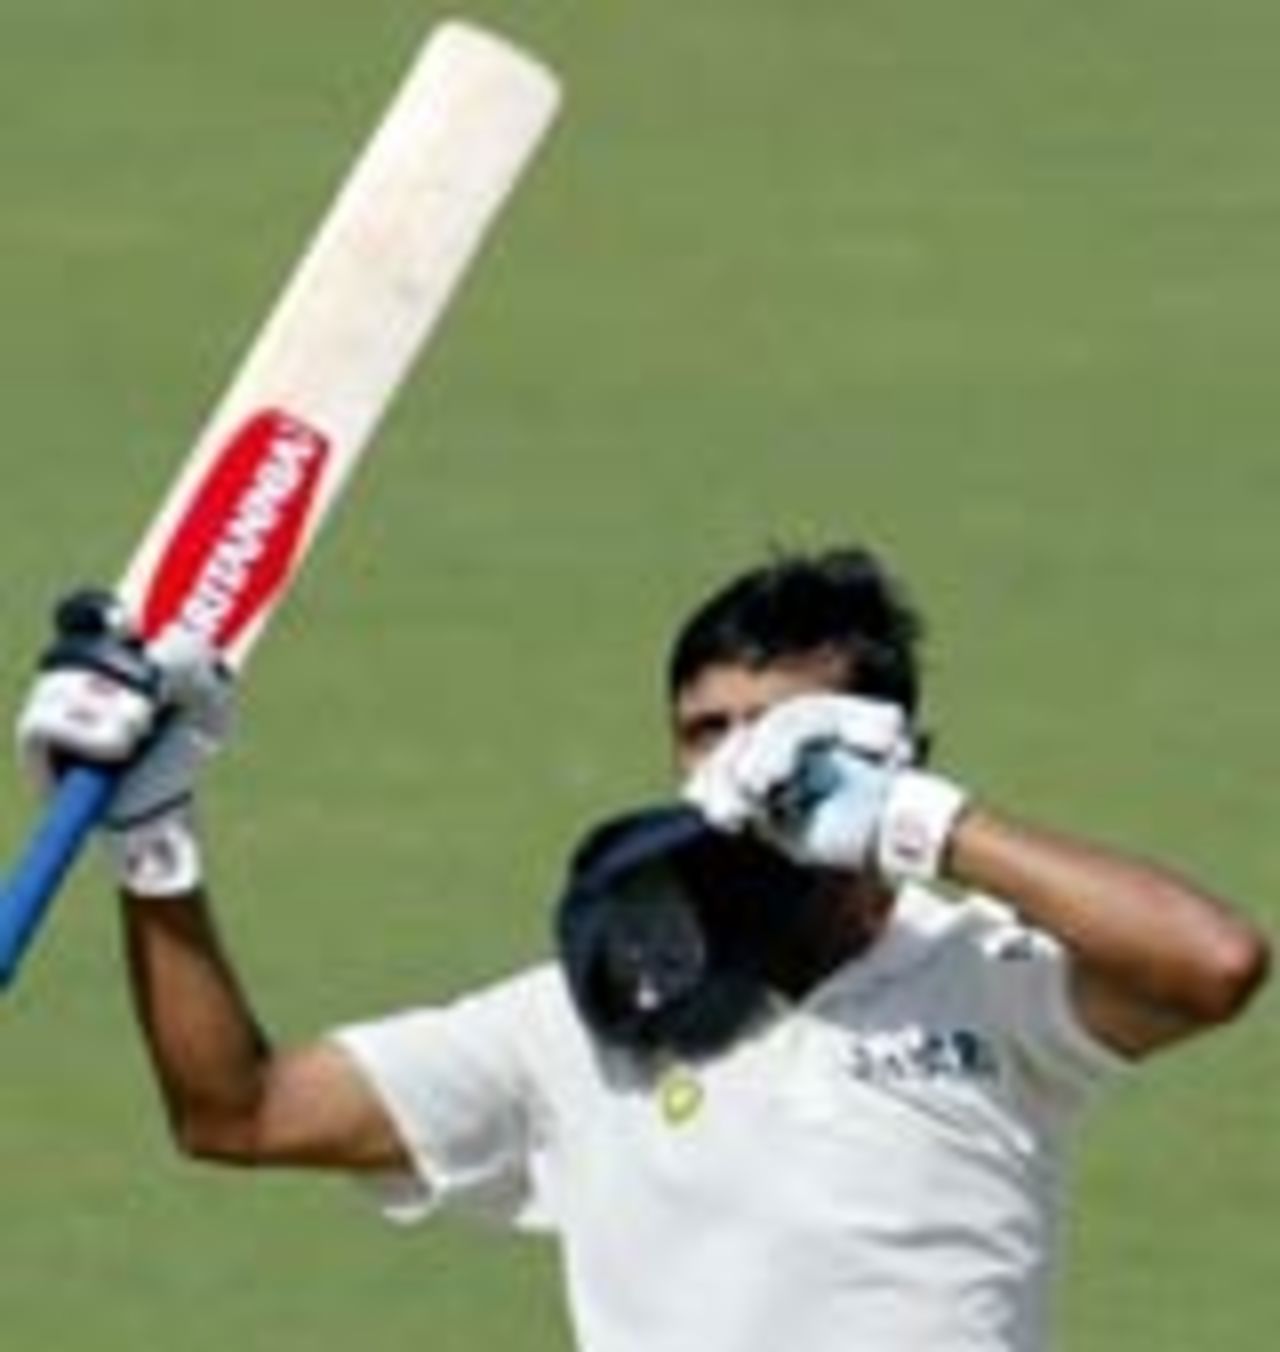 Dravid kisses the India crest on his cap, Australia v India, 2nd Test, Adelaide, 5th day, December 16, 2003